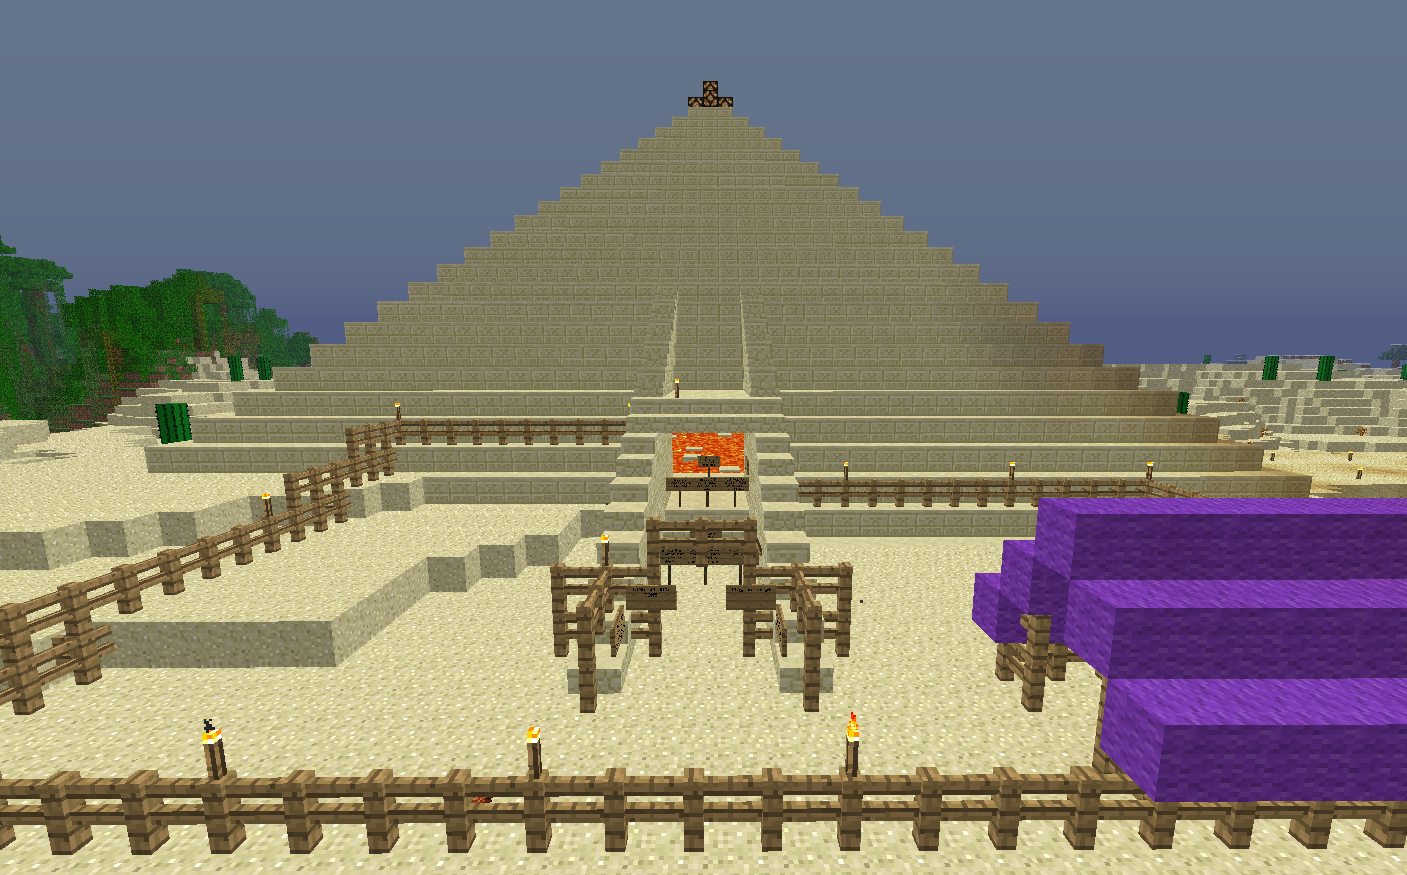 King Spoon’s Tomb, Minecraft Adventure / Puzzle Map Download.